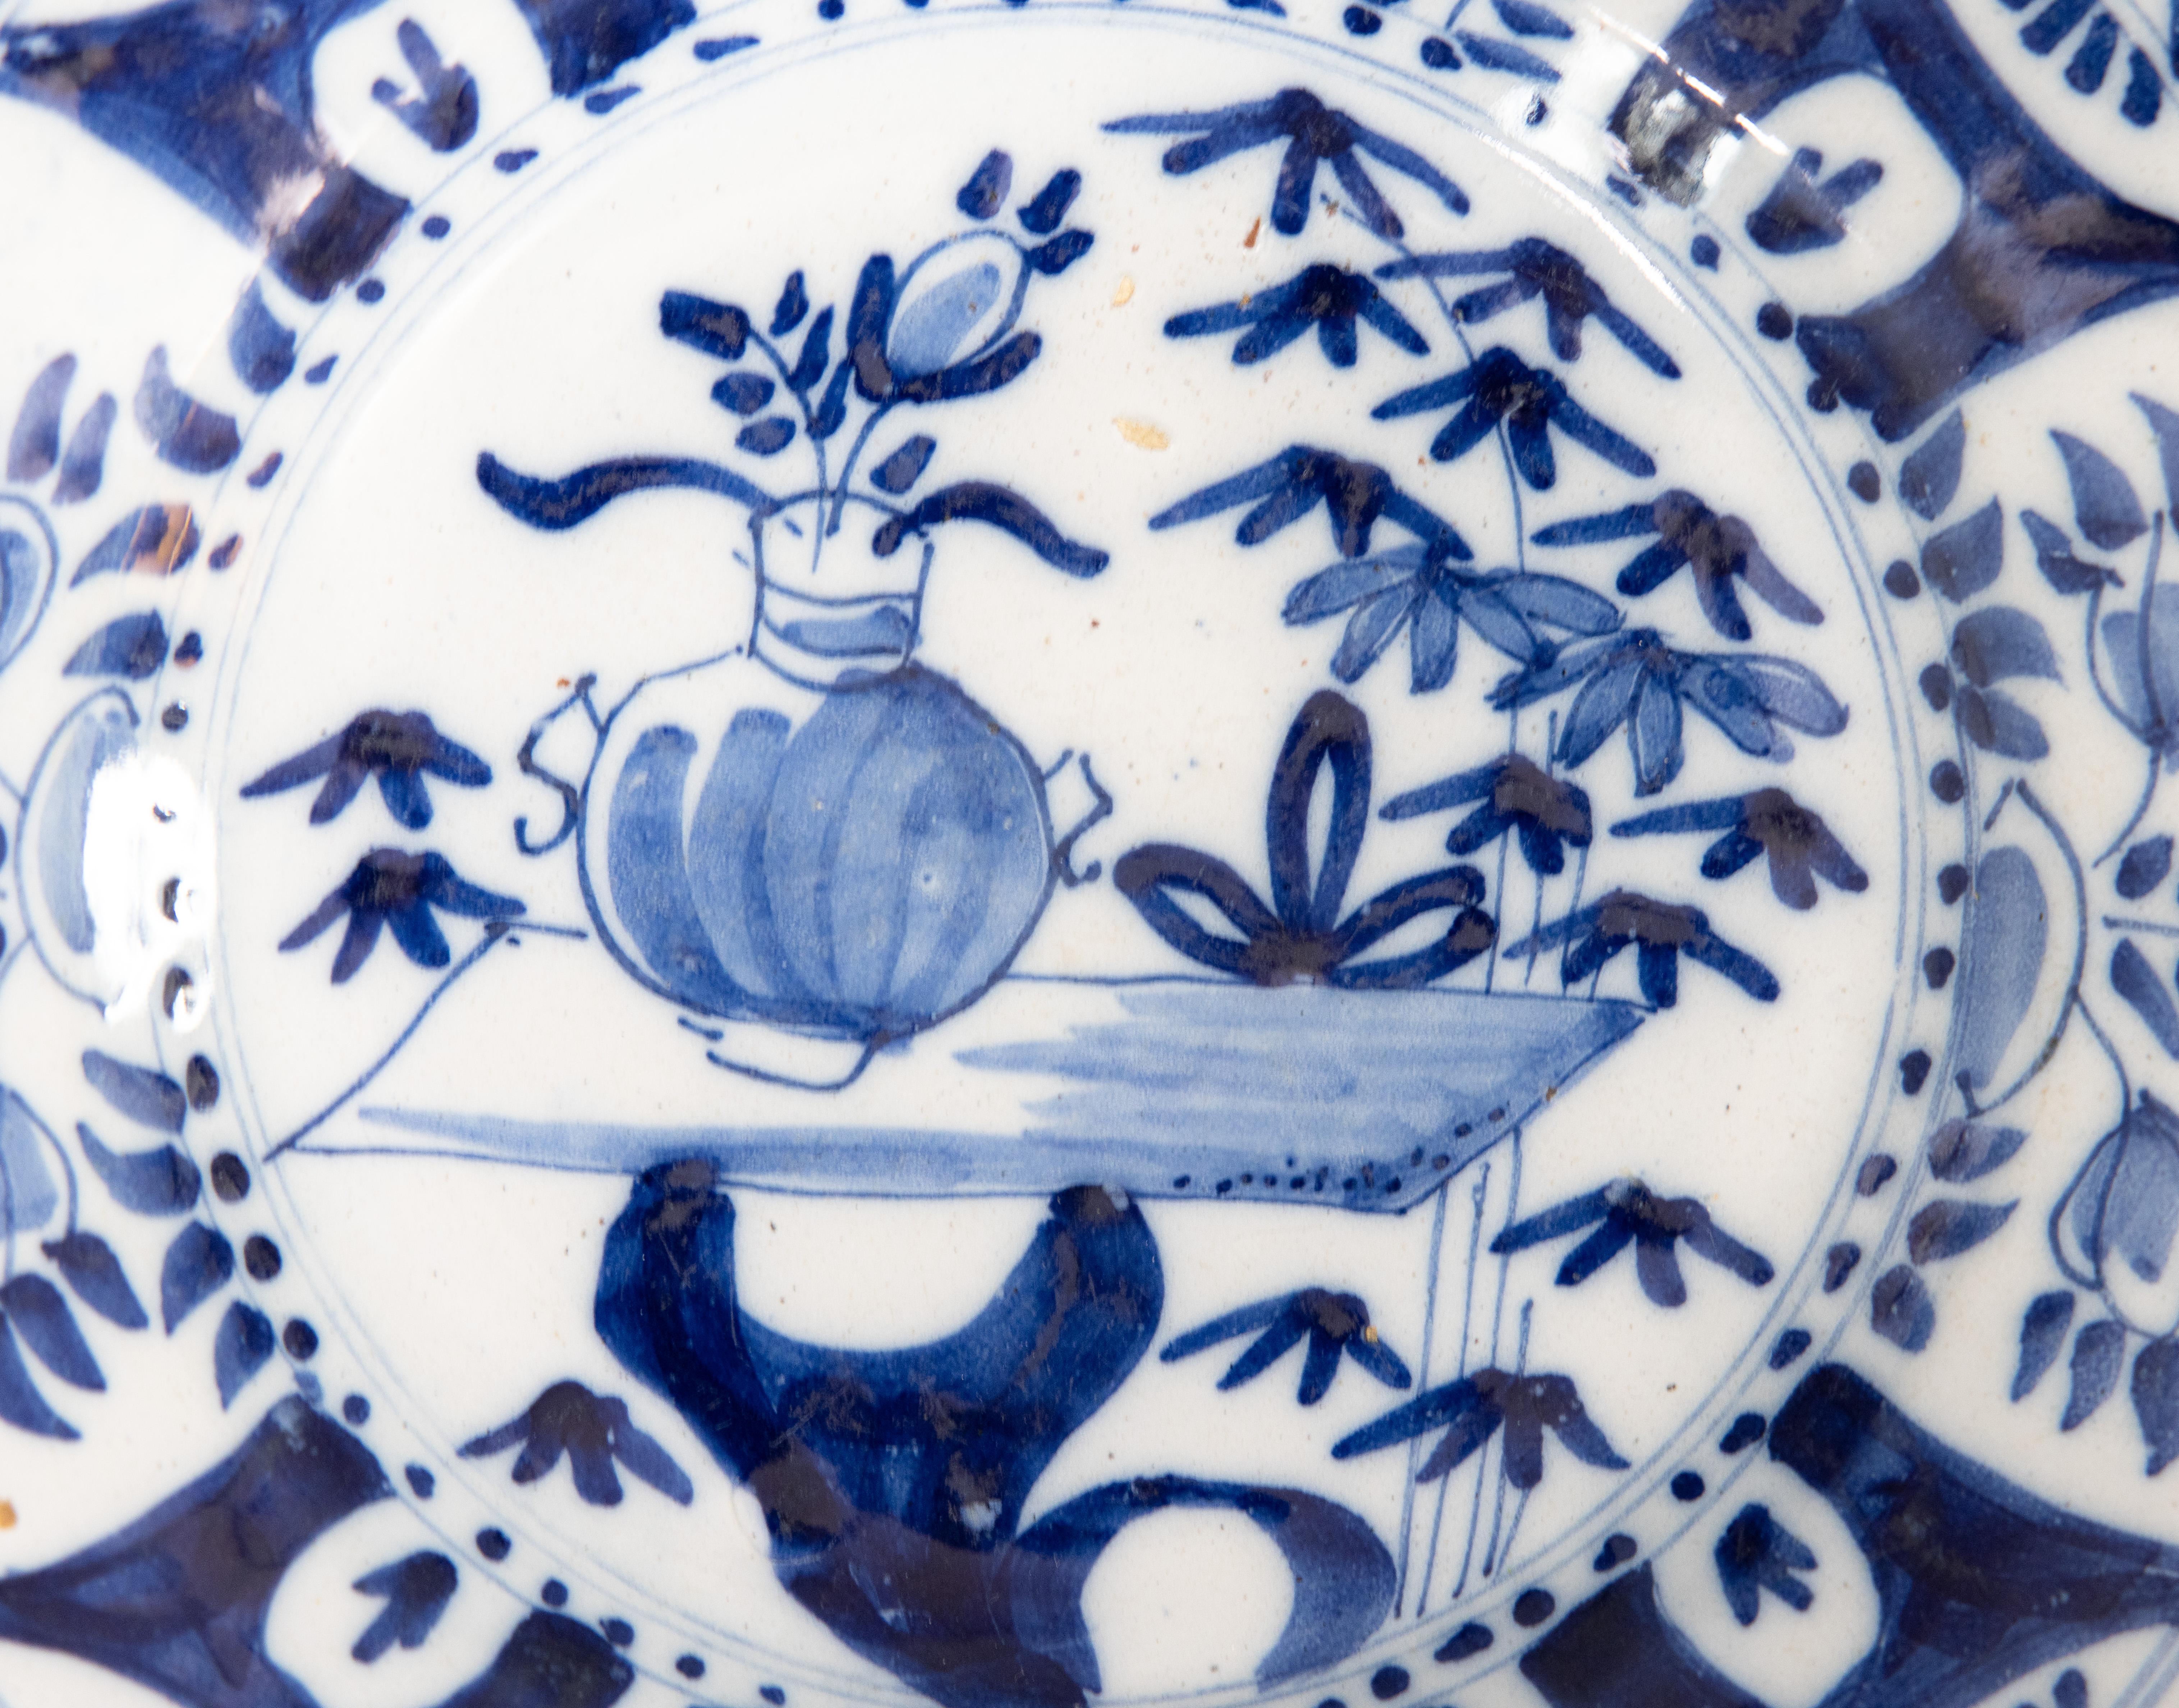 A lovely antique 18th-Century Dutch Delft Chinoiserie hand painted floral plate in vibrant cobalt blue and white. It would look fabulous displayed on a wall or shelf in any room.

DIMENSIONS
9